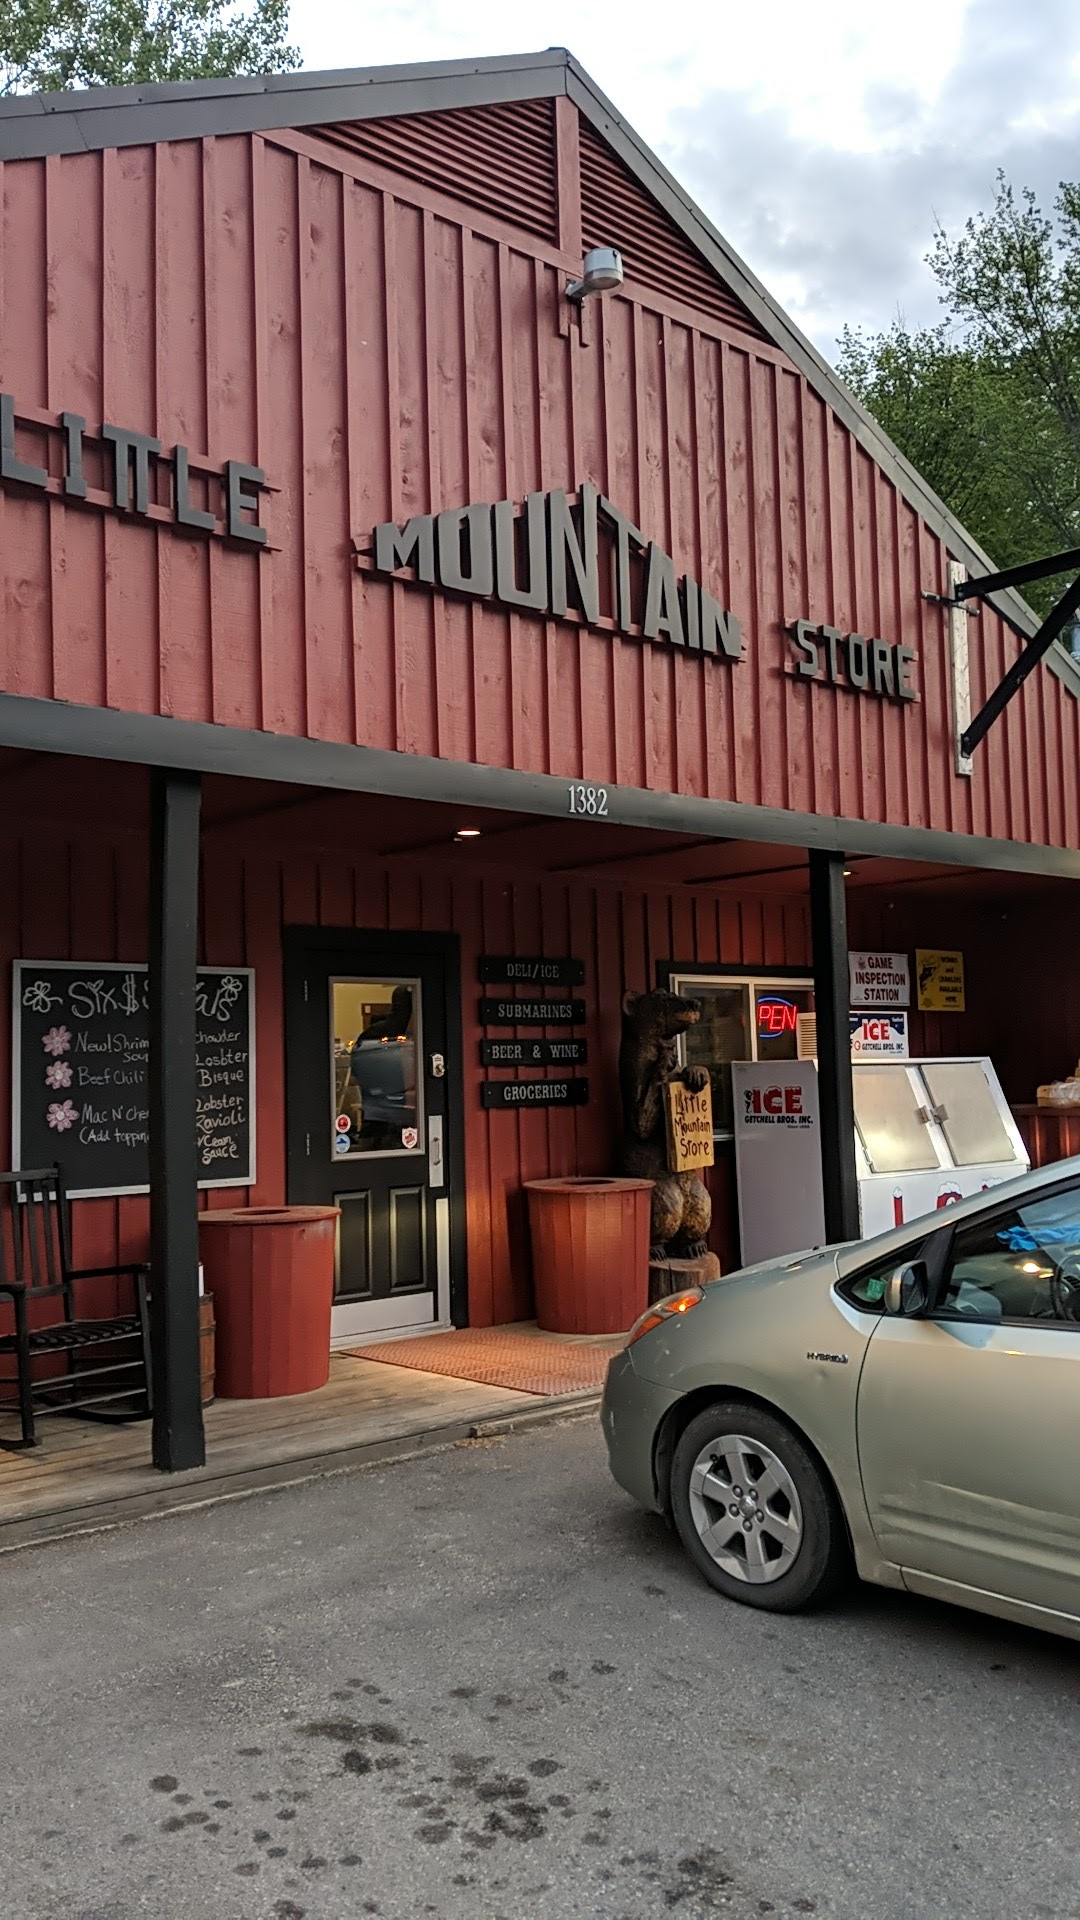 The Little Mountain Store